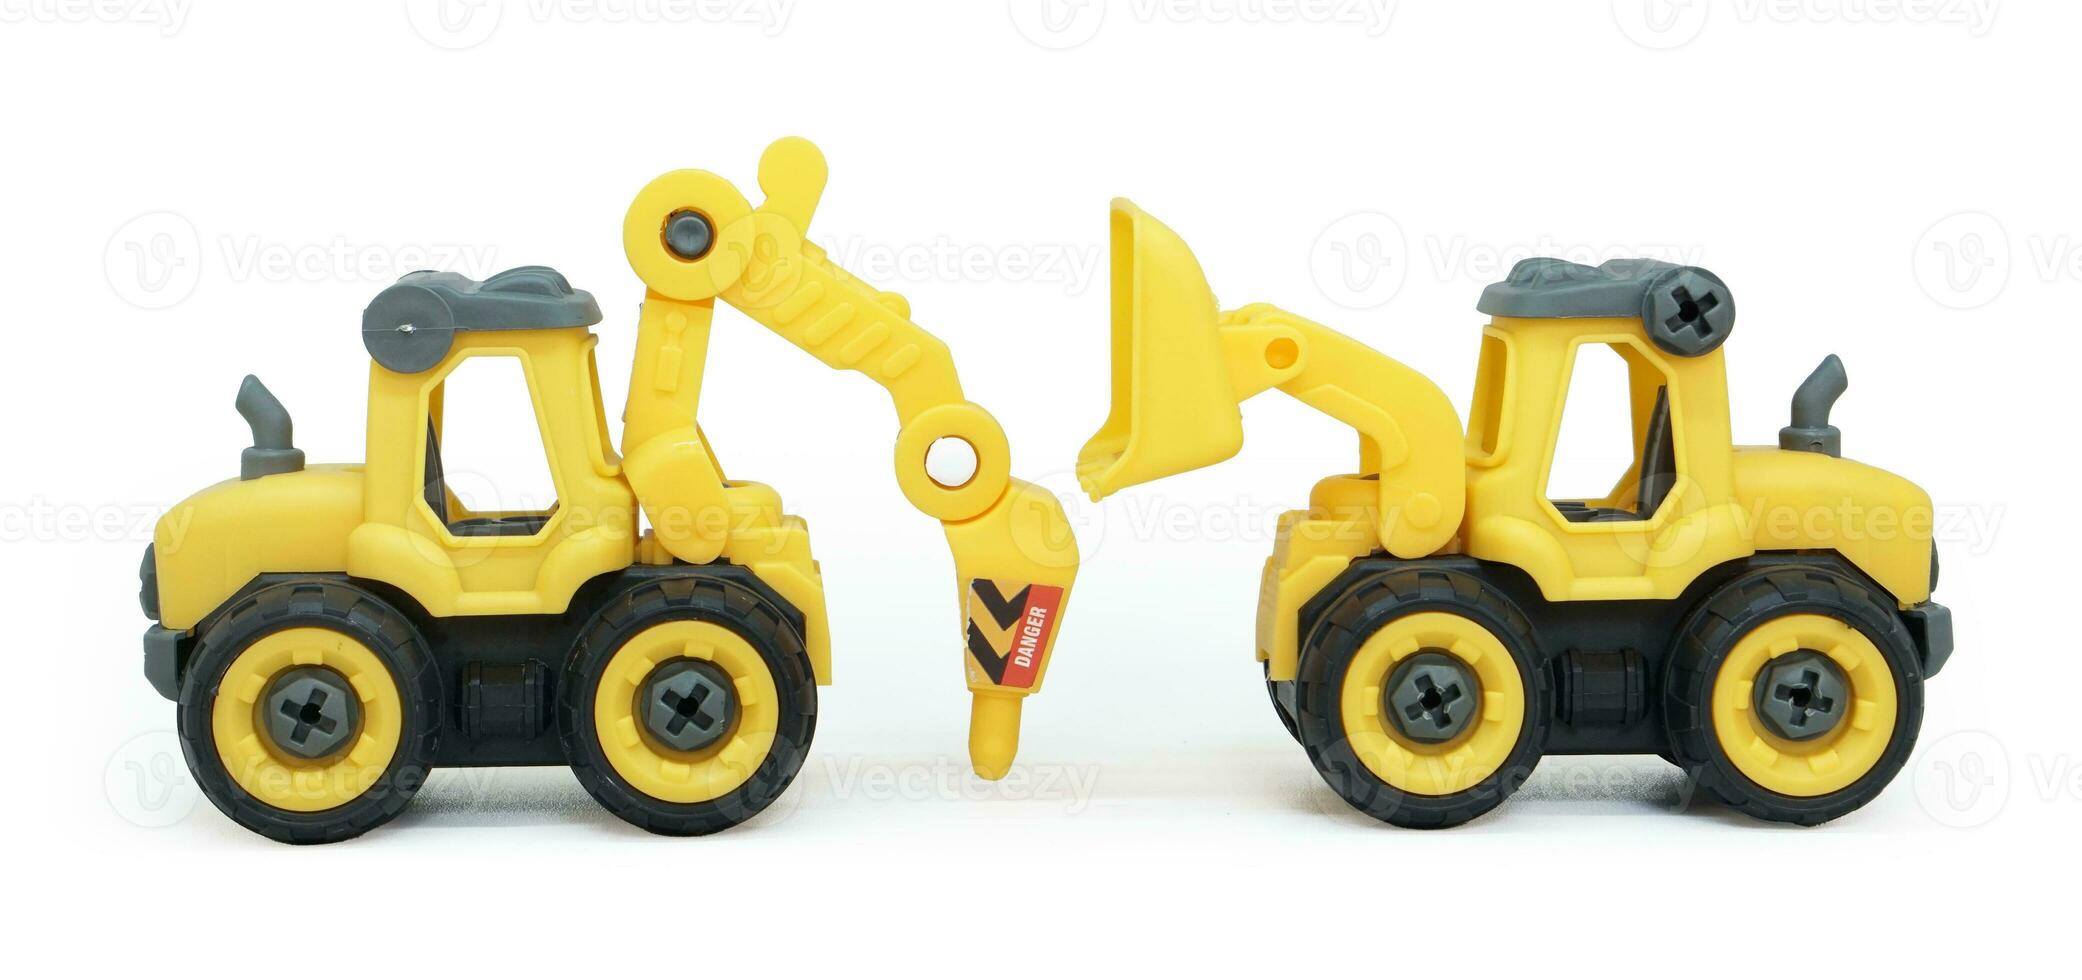 yellow plastic toy of tractor drill and bulldozer or loader isolated on white background. heavy construction vehicle. side view. photo